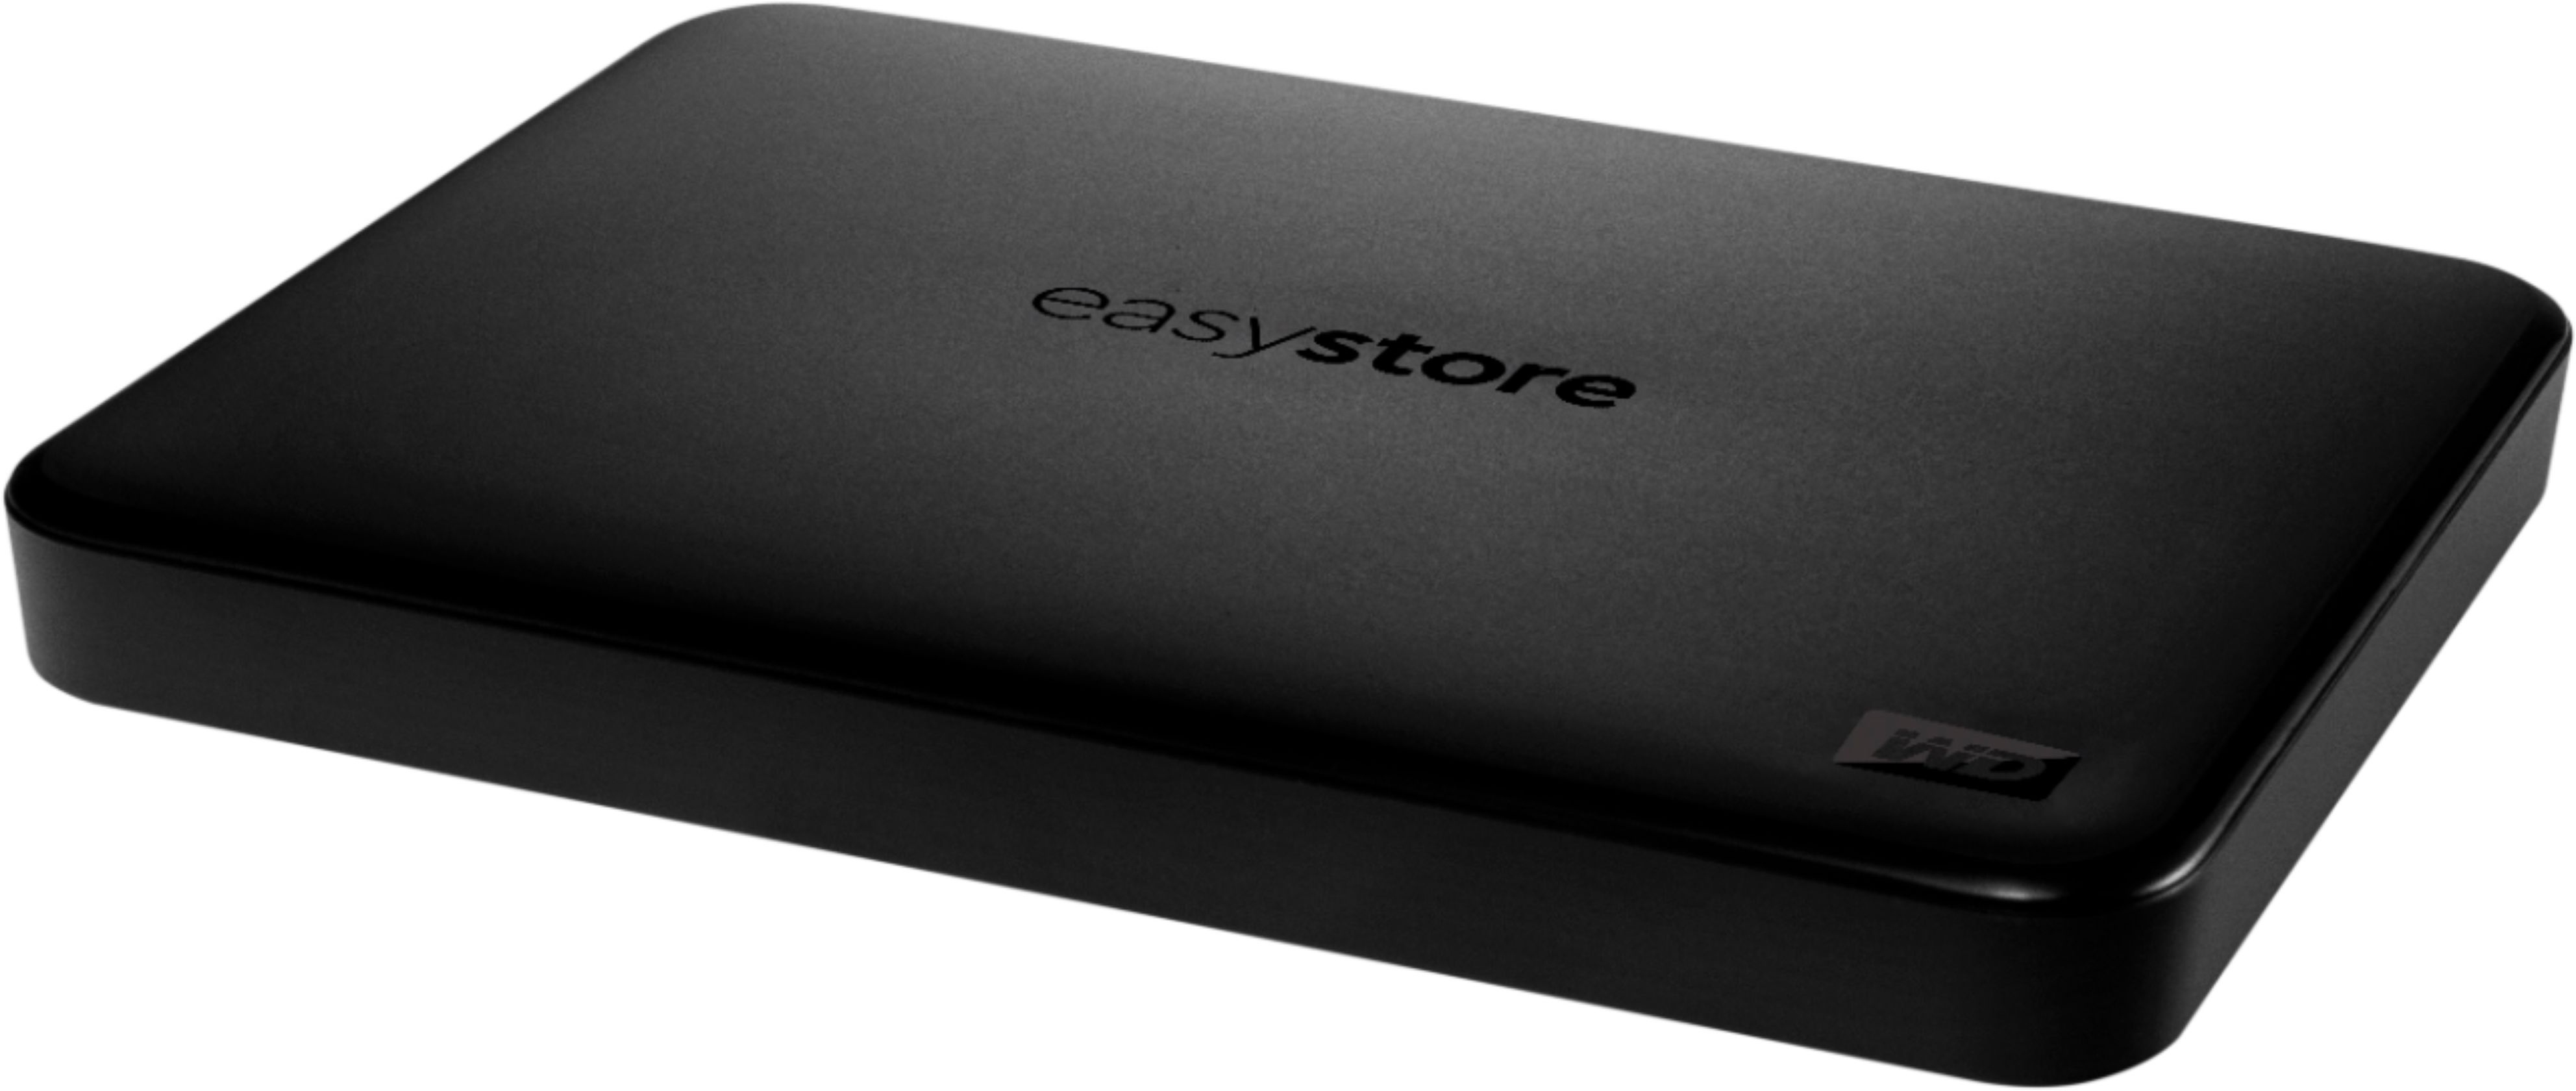 wd easystore 2tb xbox one